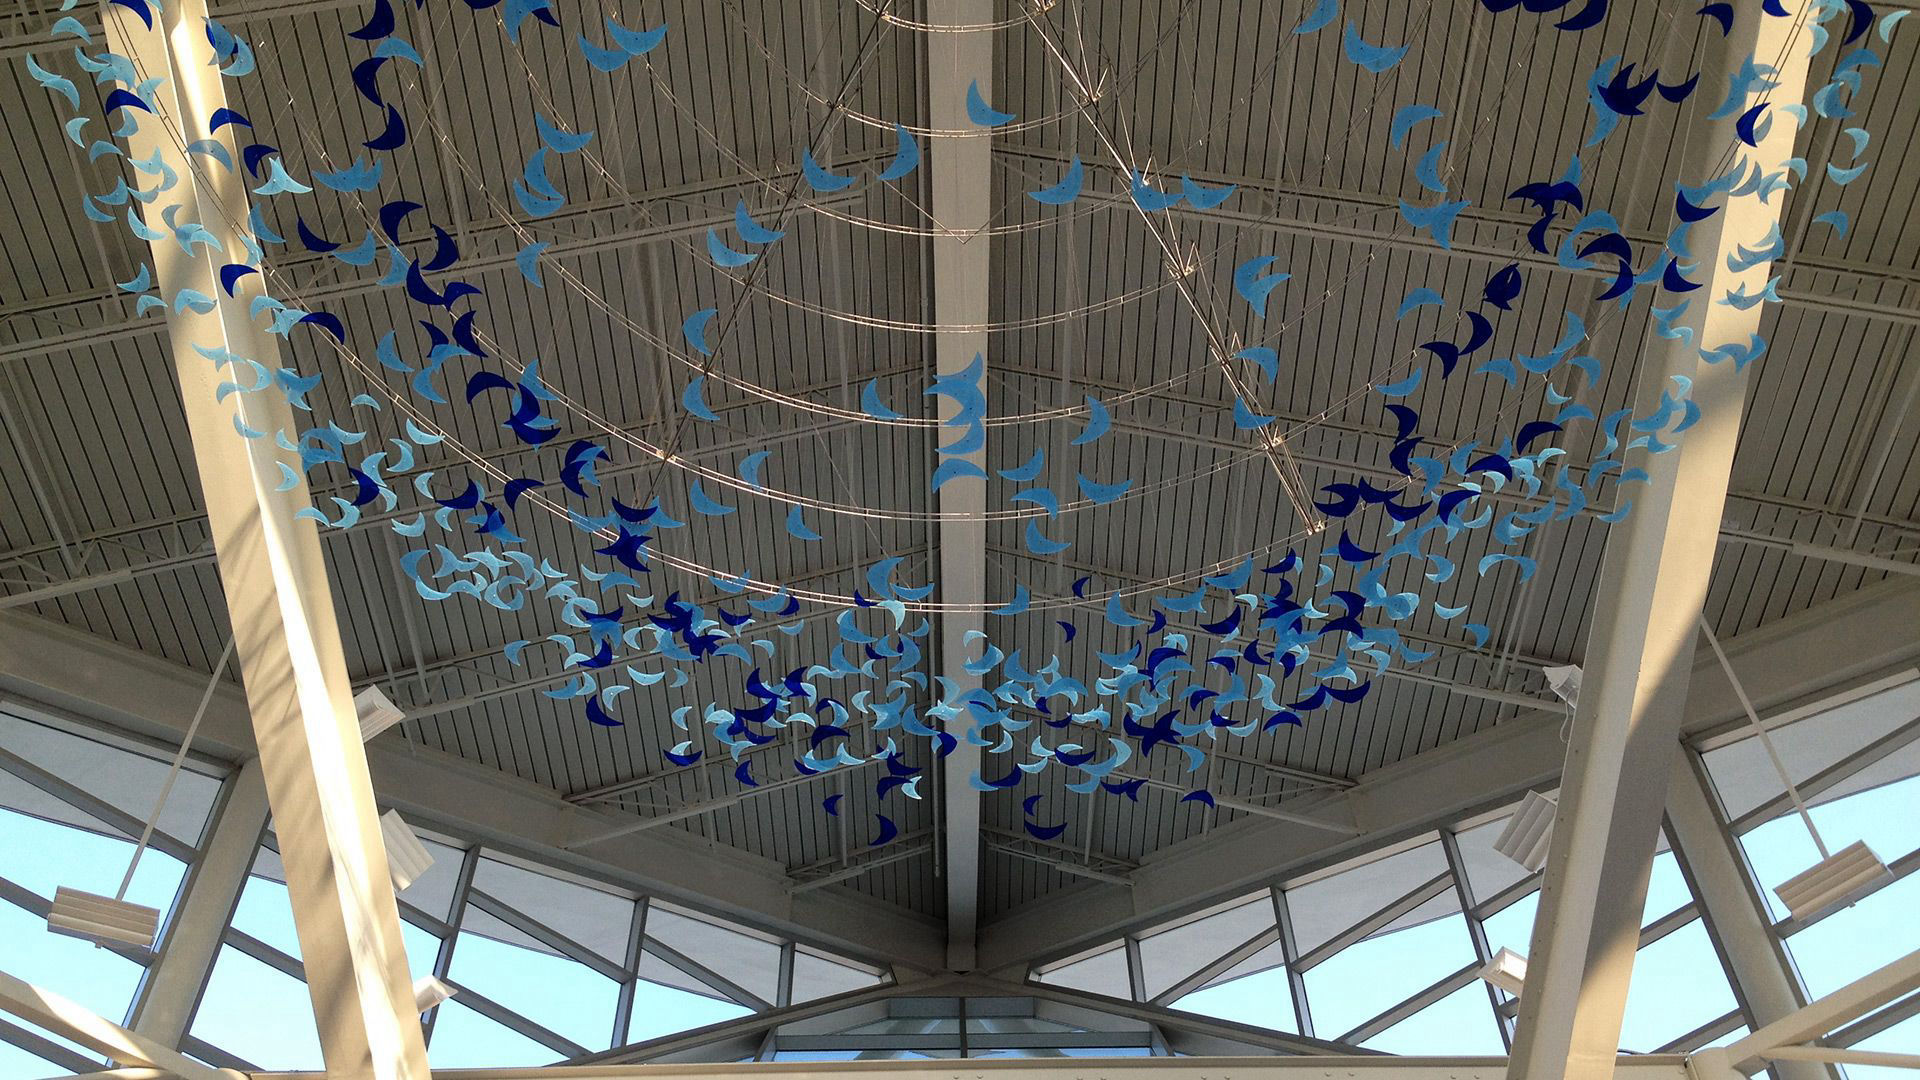 Dream of Flight stainless steel stained glass public art sculpture by Heath Satow RDU Airport NC